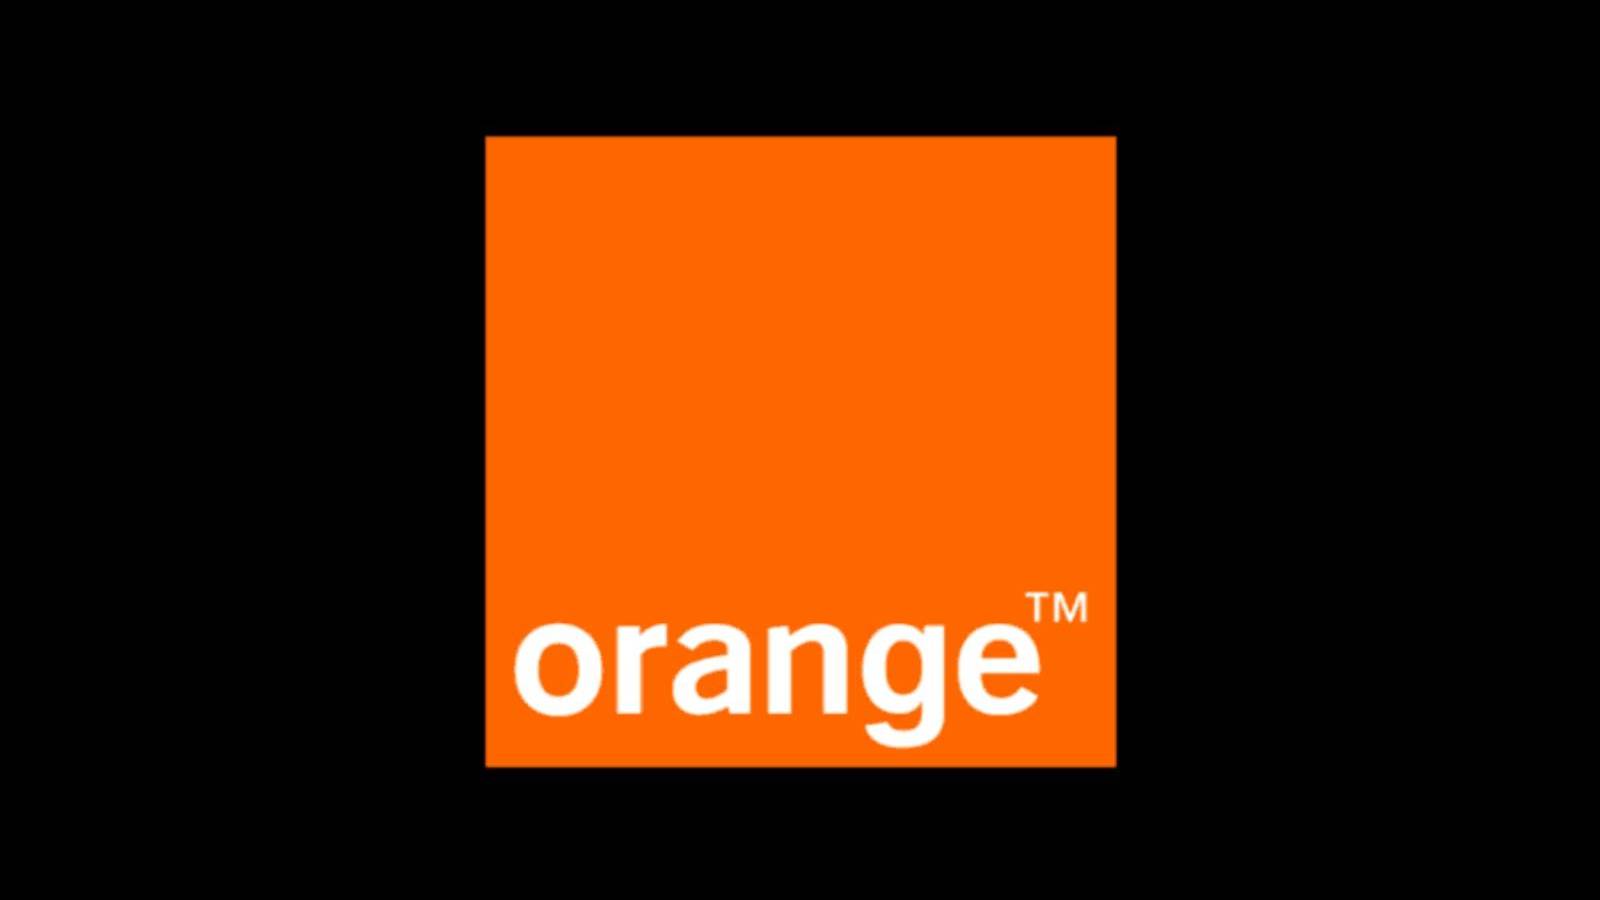 The Official Announcement of Orange Romania, about what it is notifying Romanians about today